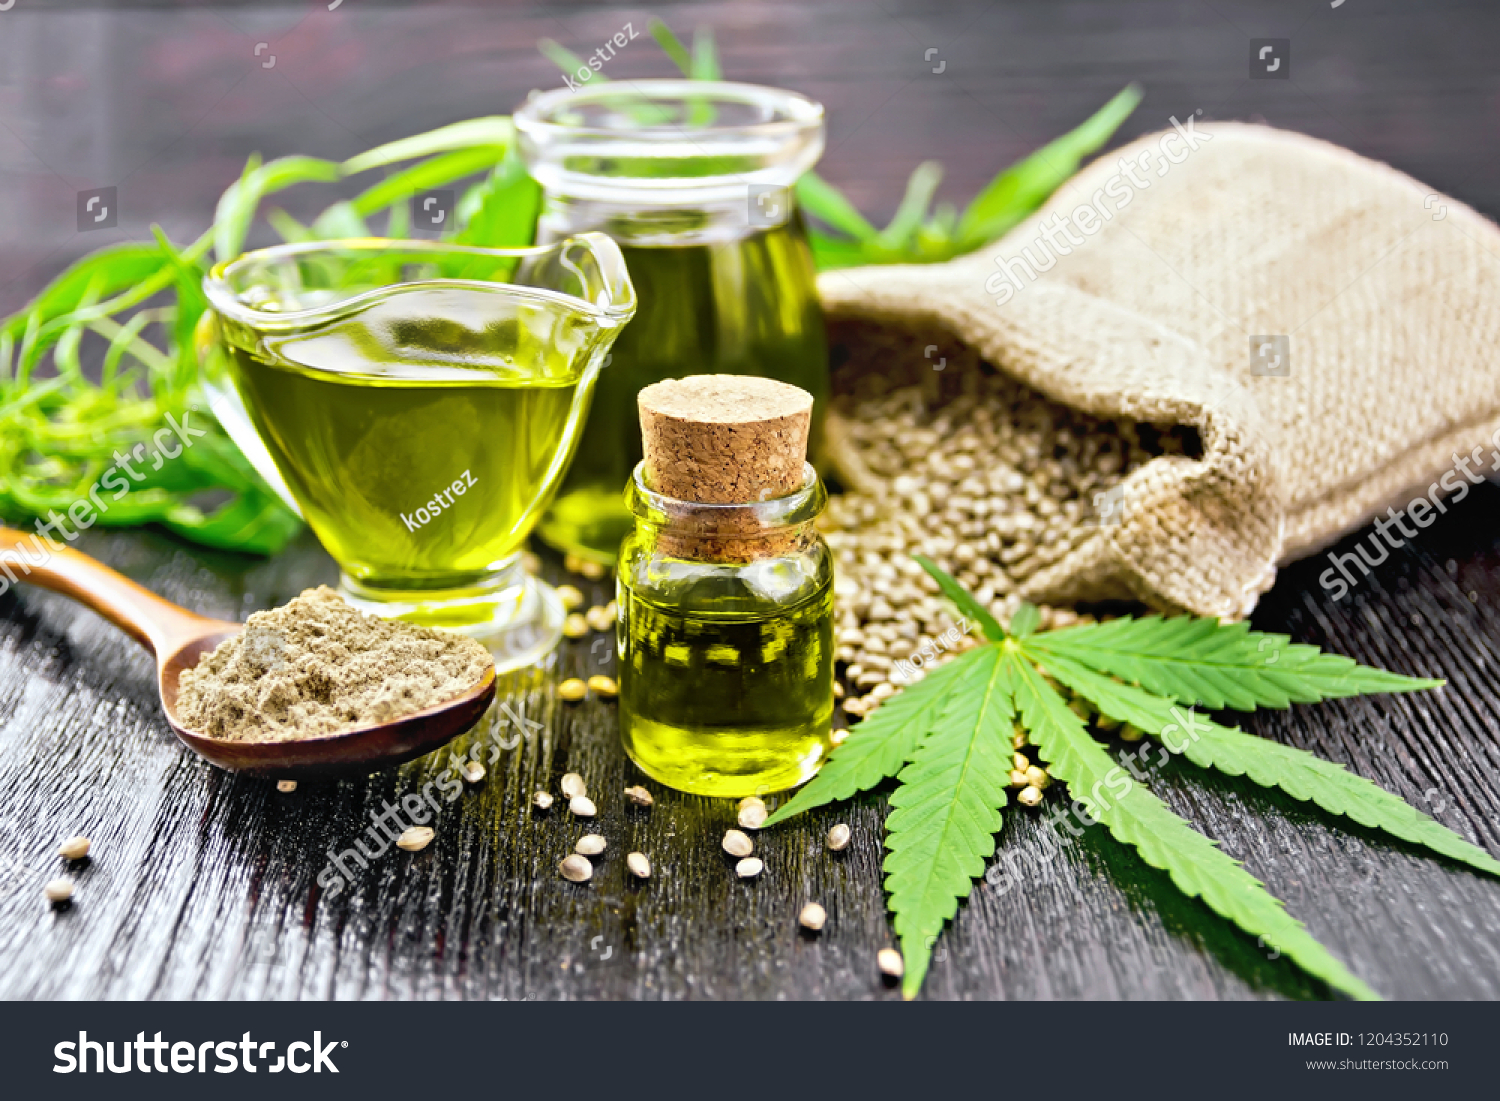 Hemp oil in two glass jars and sauceboat with grain in the bag, leaves and stalks of cannabis, a spoon with flour on the background of wooden boards #1204352110